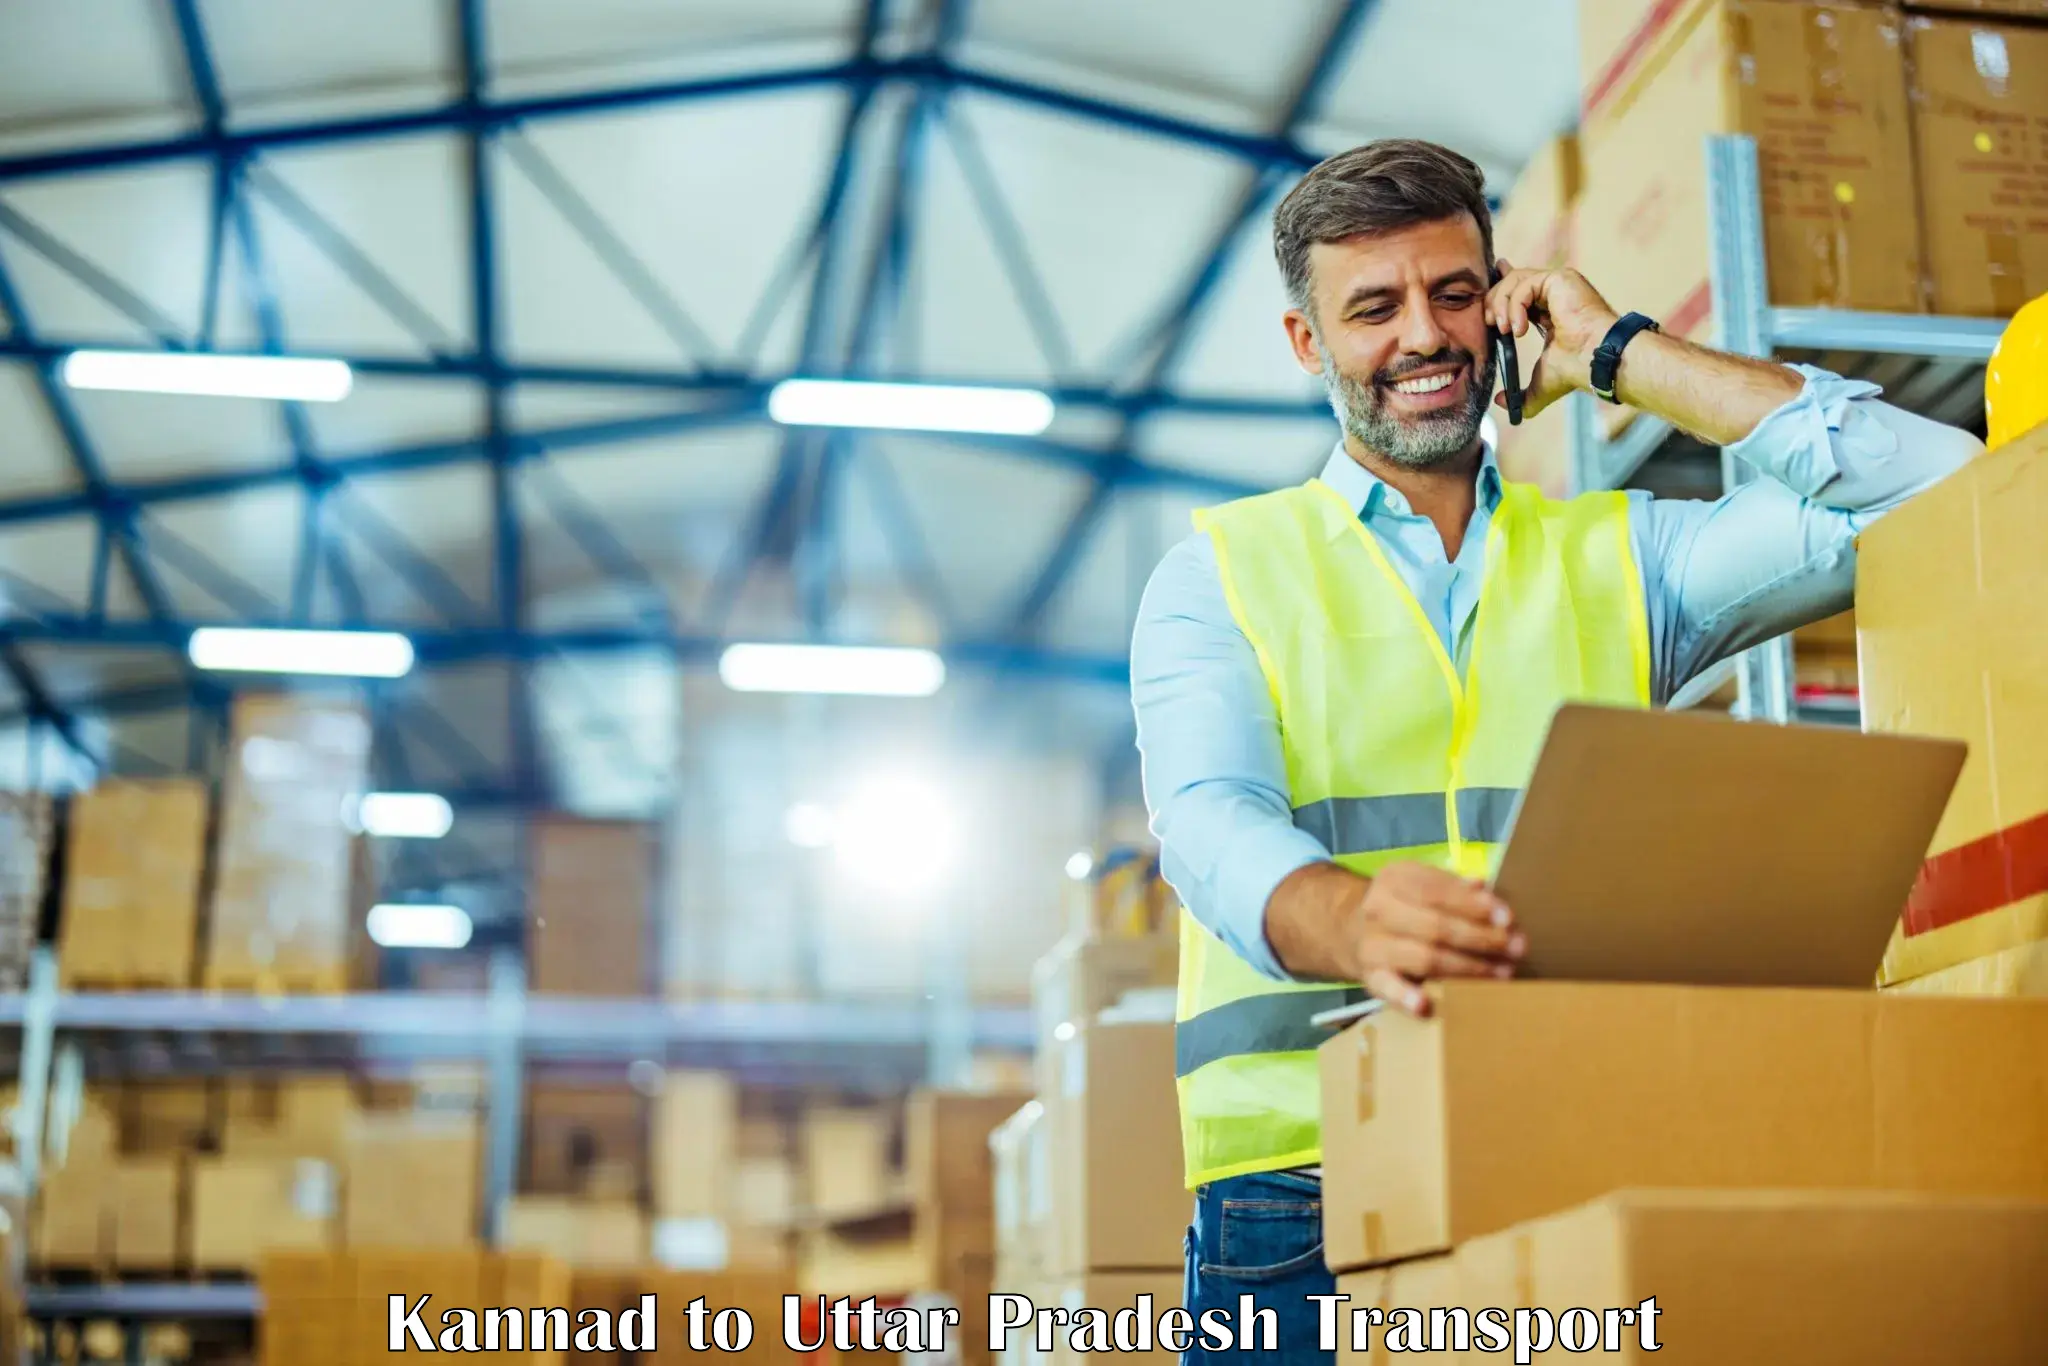 Container transportation services Kannad to Lucknow